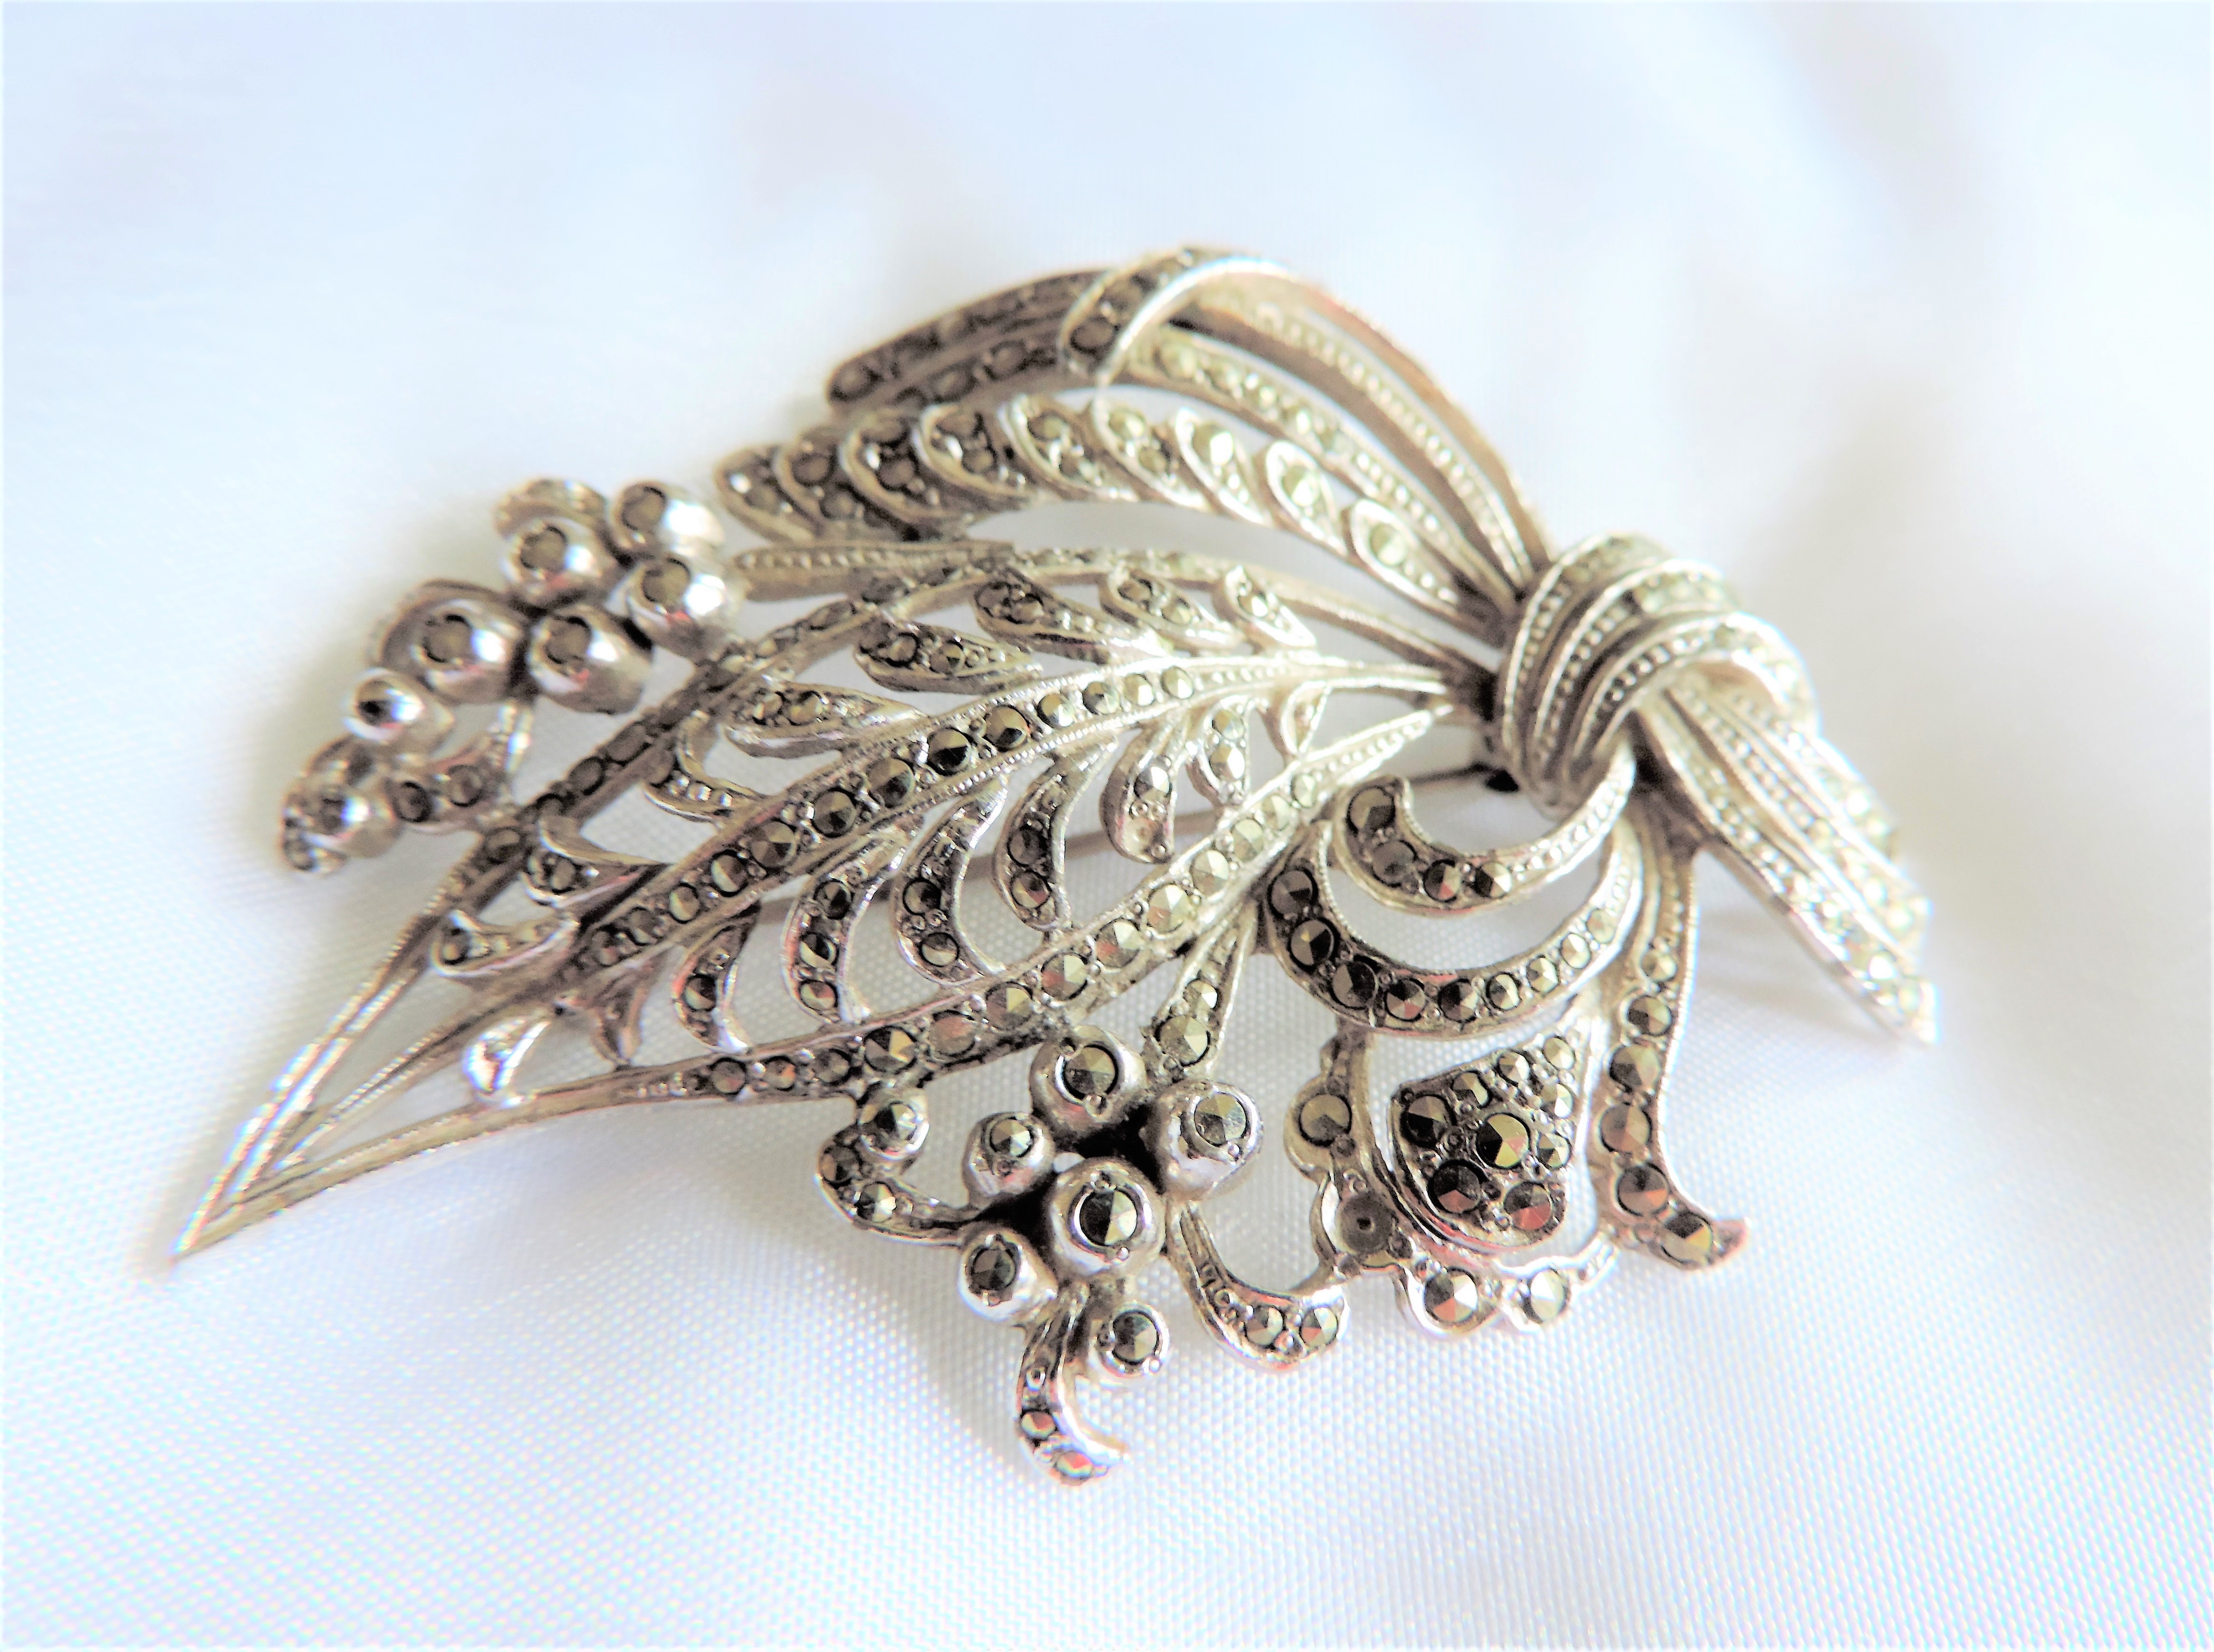 Vintage Marcasite Brooch 2.75 inches wide